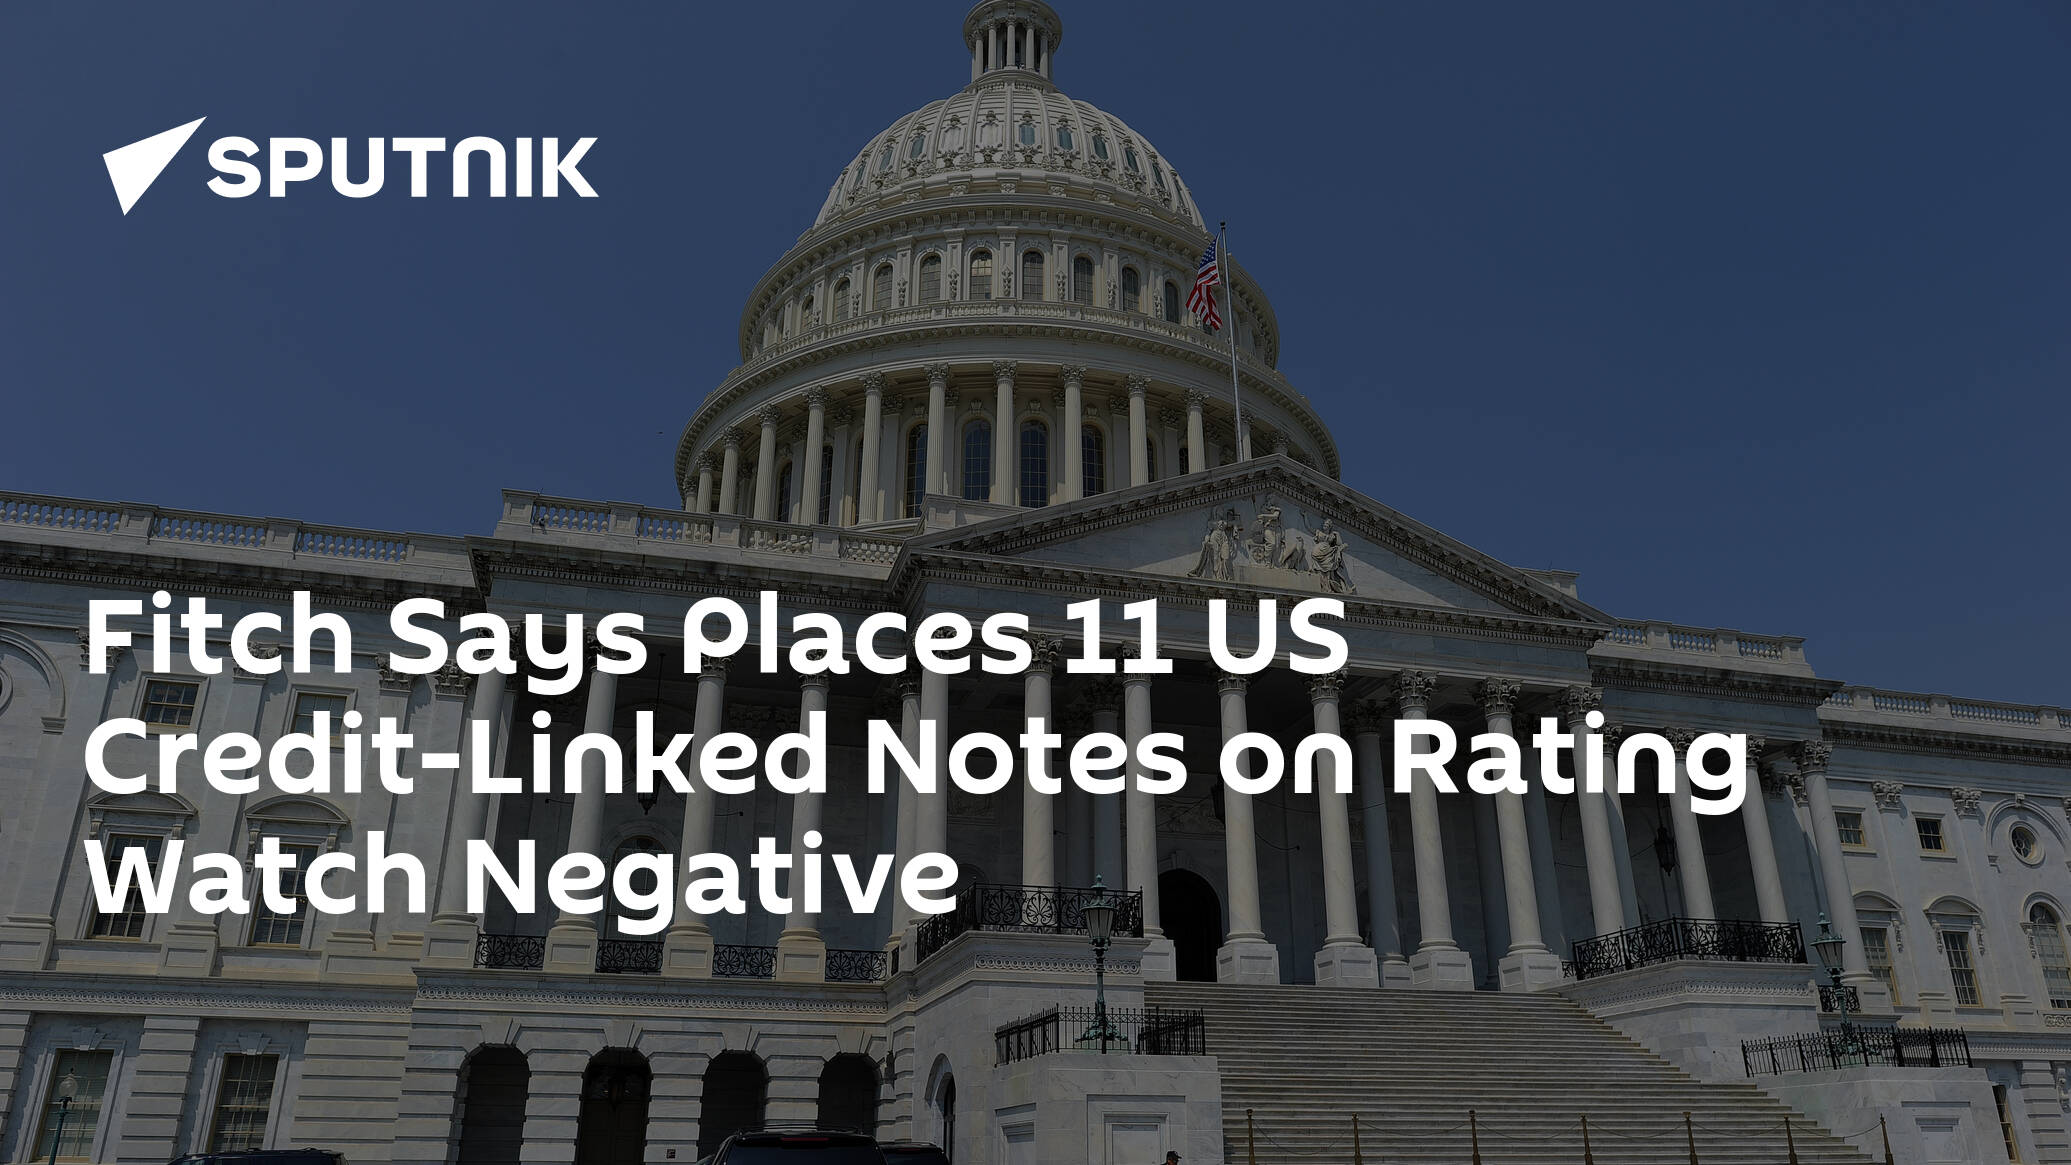 Fitch Says Places 11 US Credit-Linked Notes on Rating Watch Negative